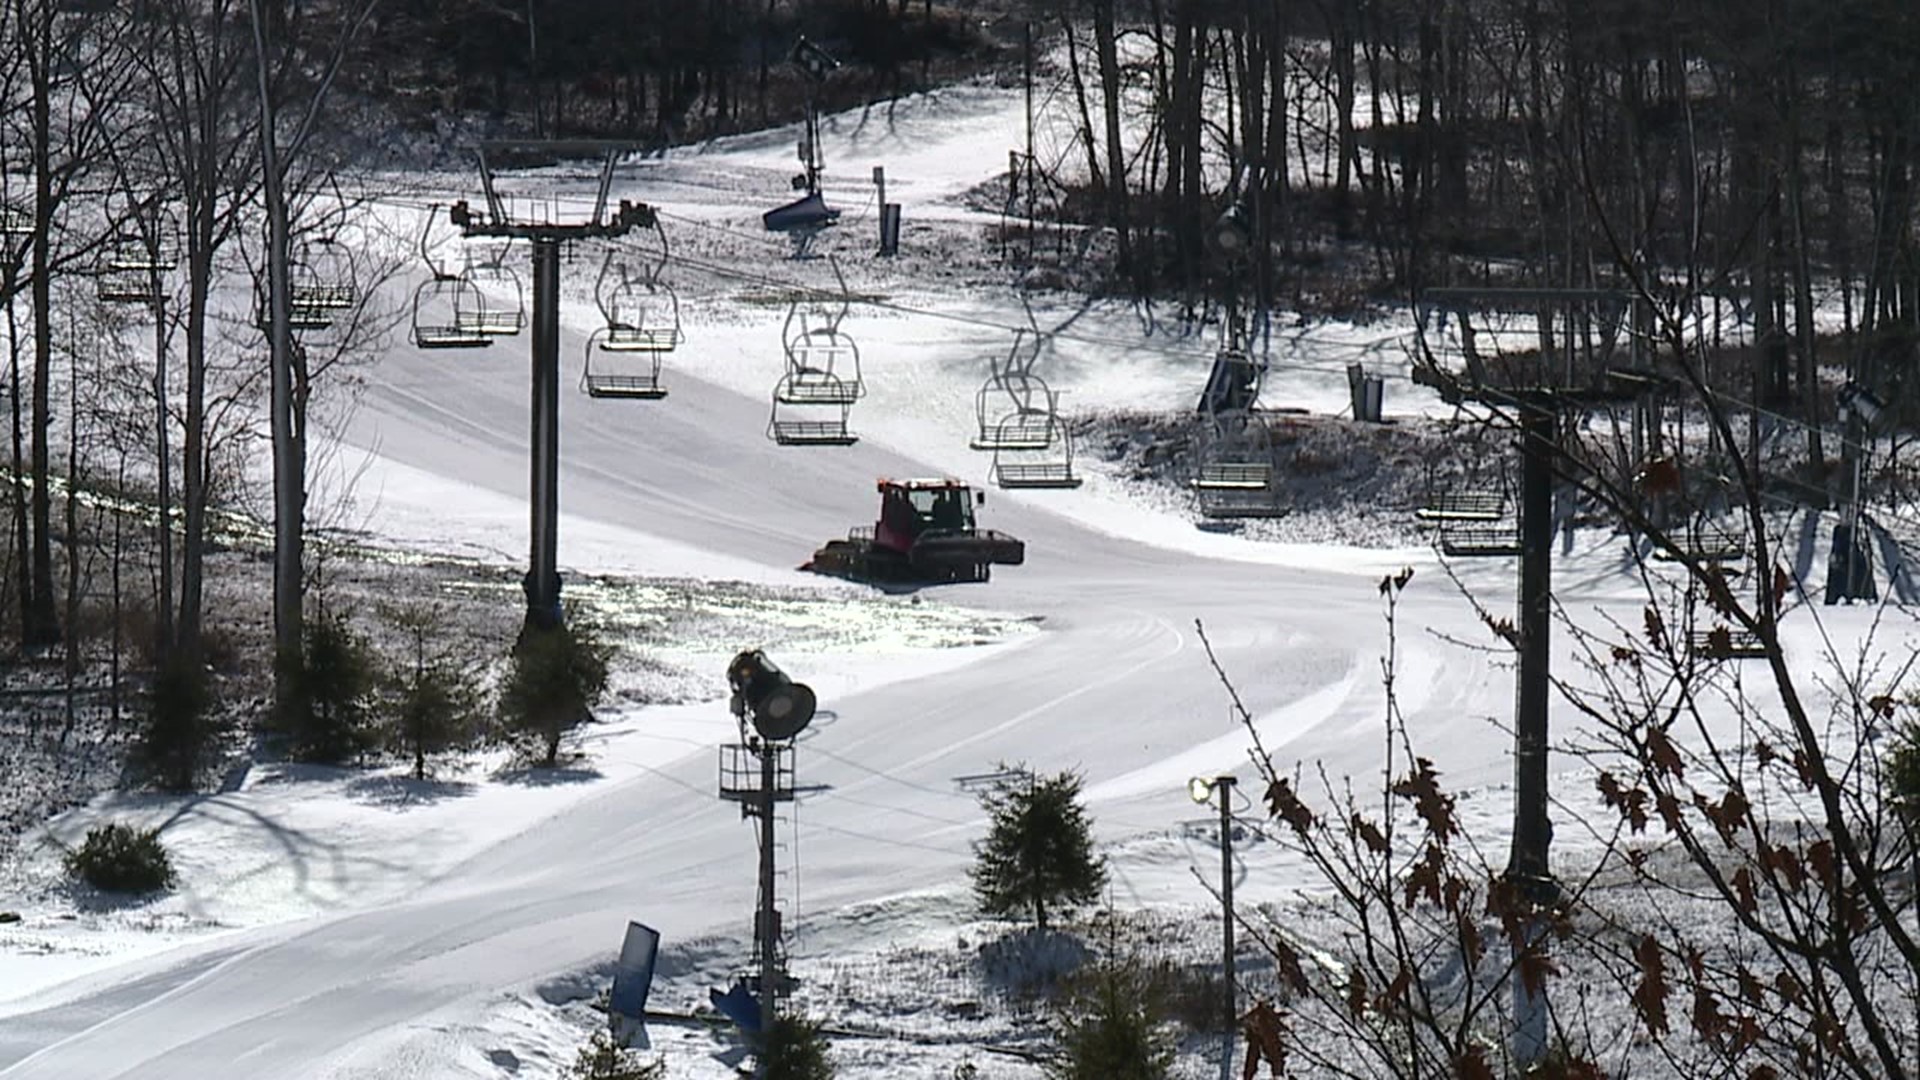 Montage Mountain plans to open on Friday for its 100th day of the season.